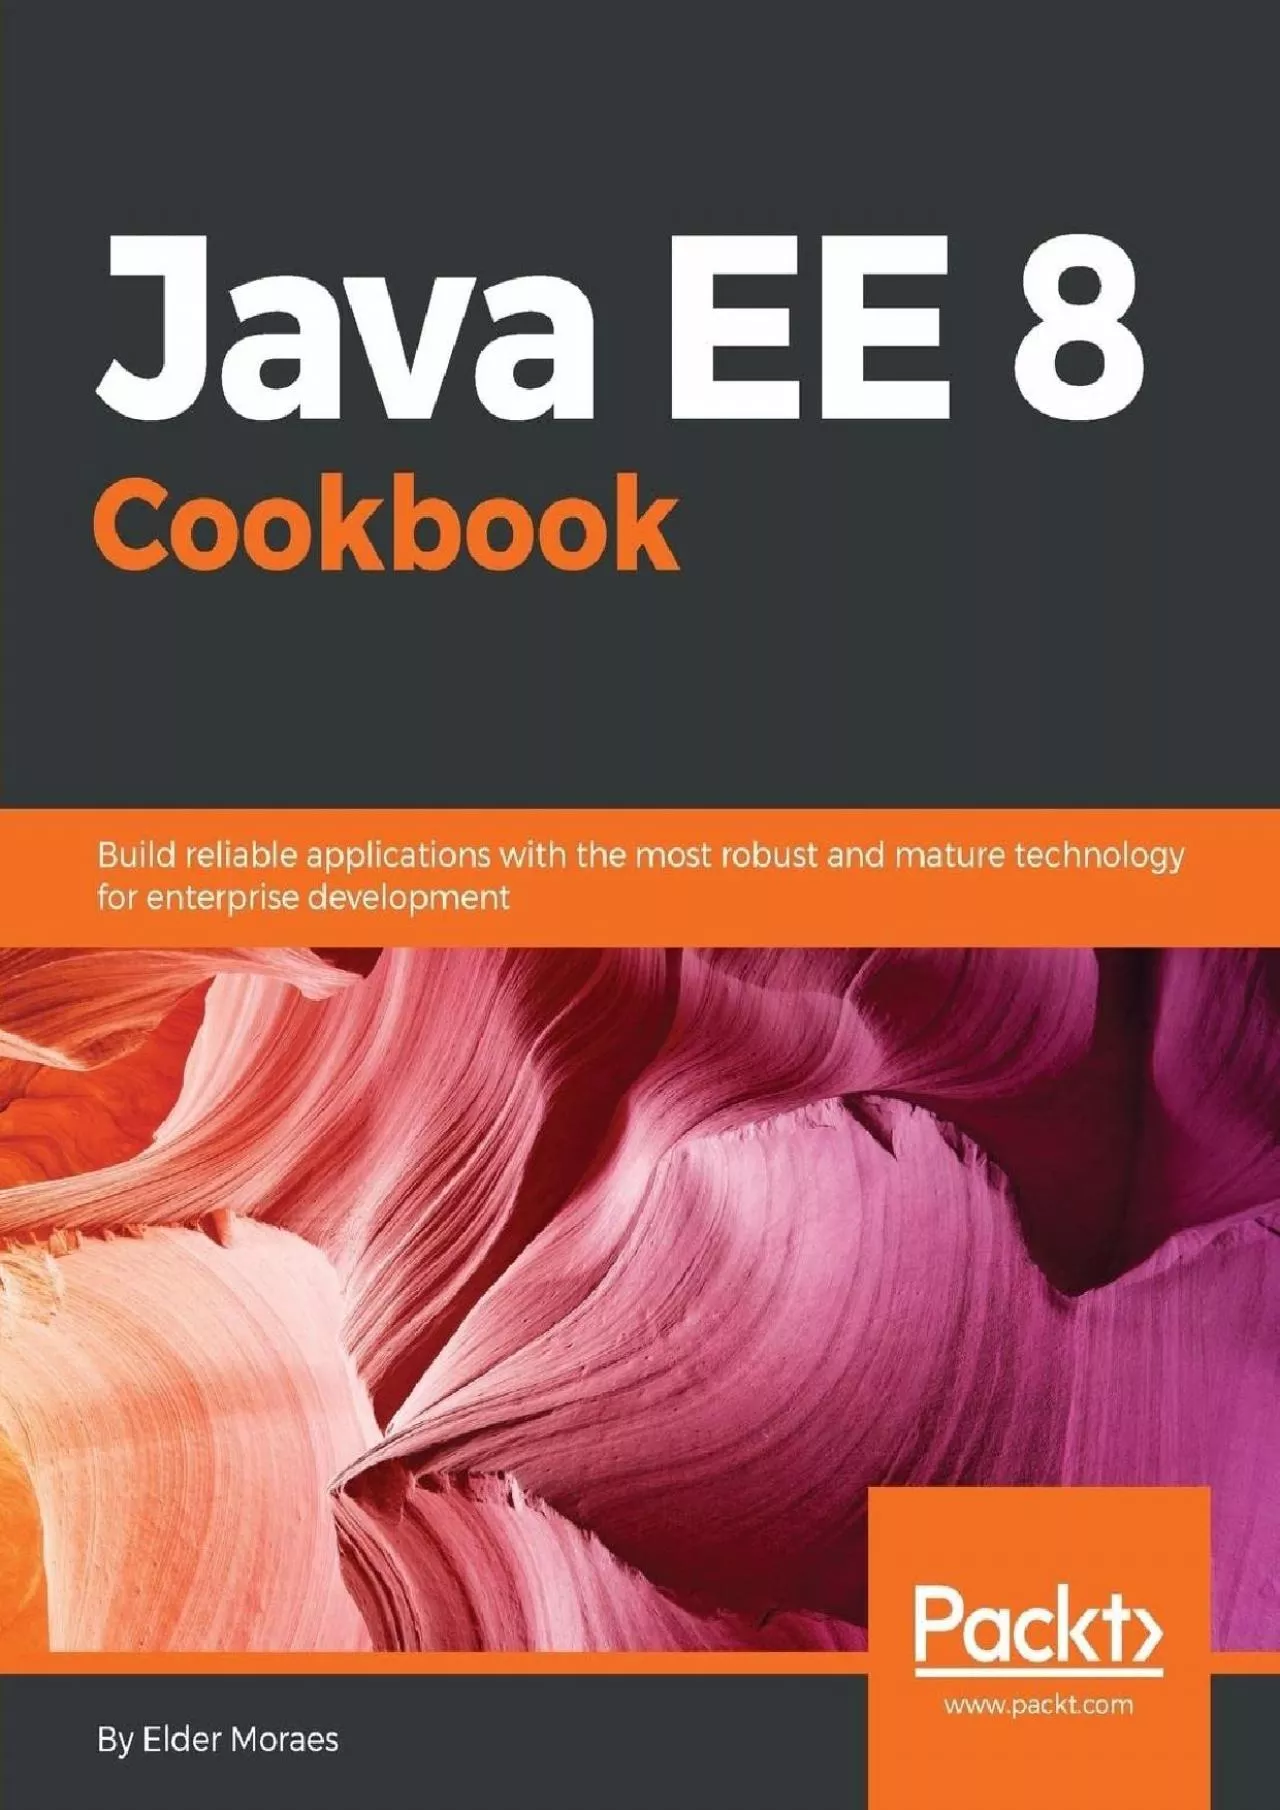 Java EE 8 Cookbook: Build reliable applications with the most robust and mature technology